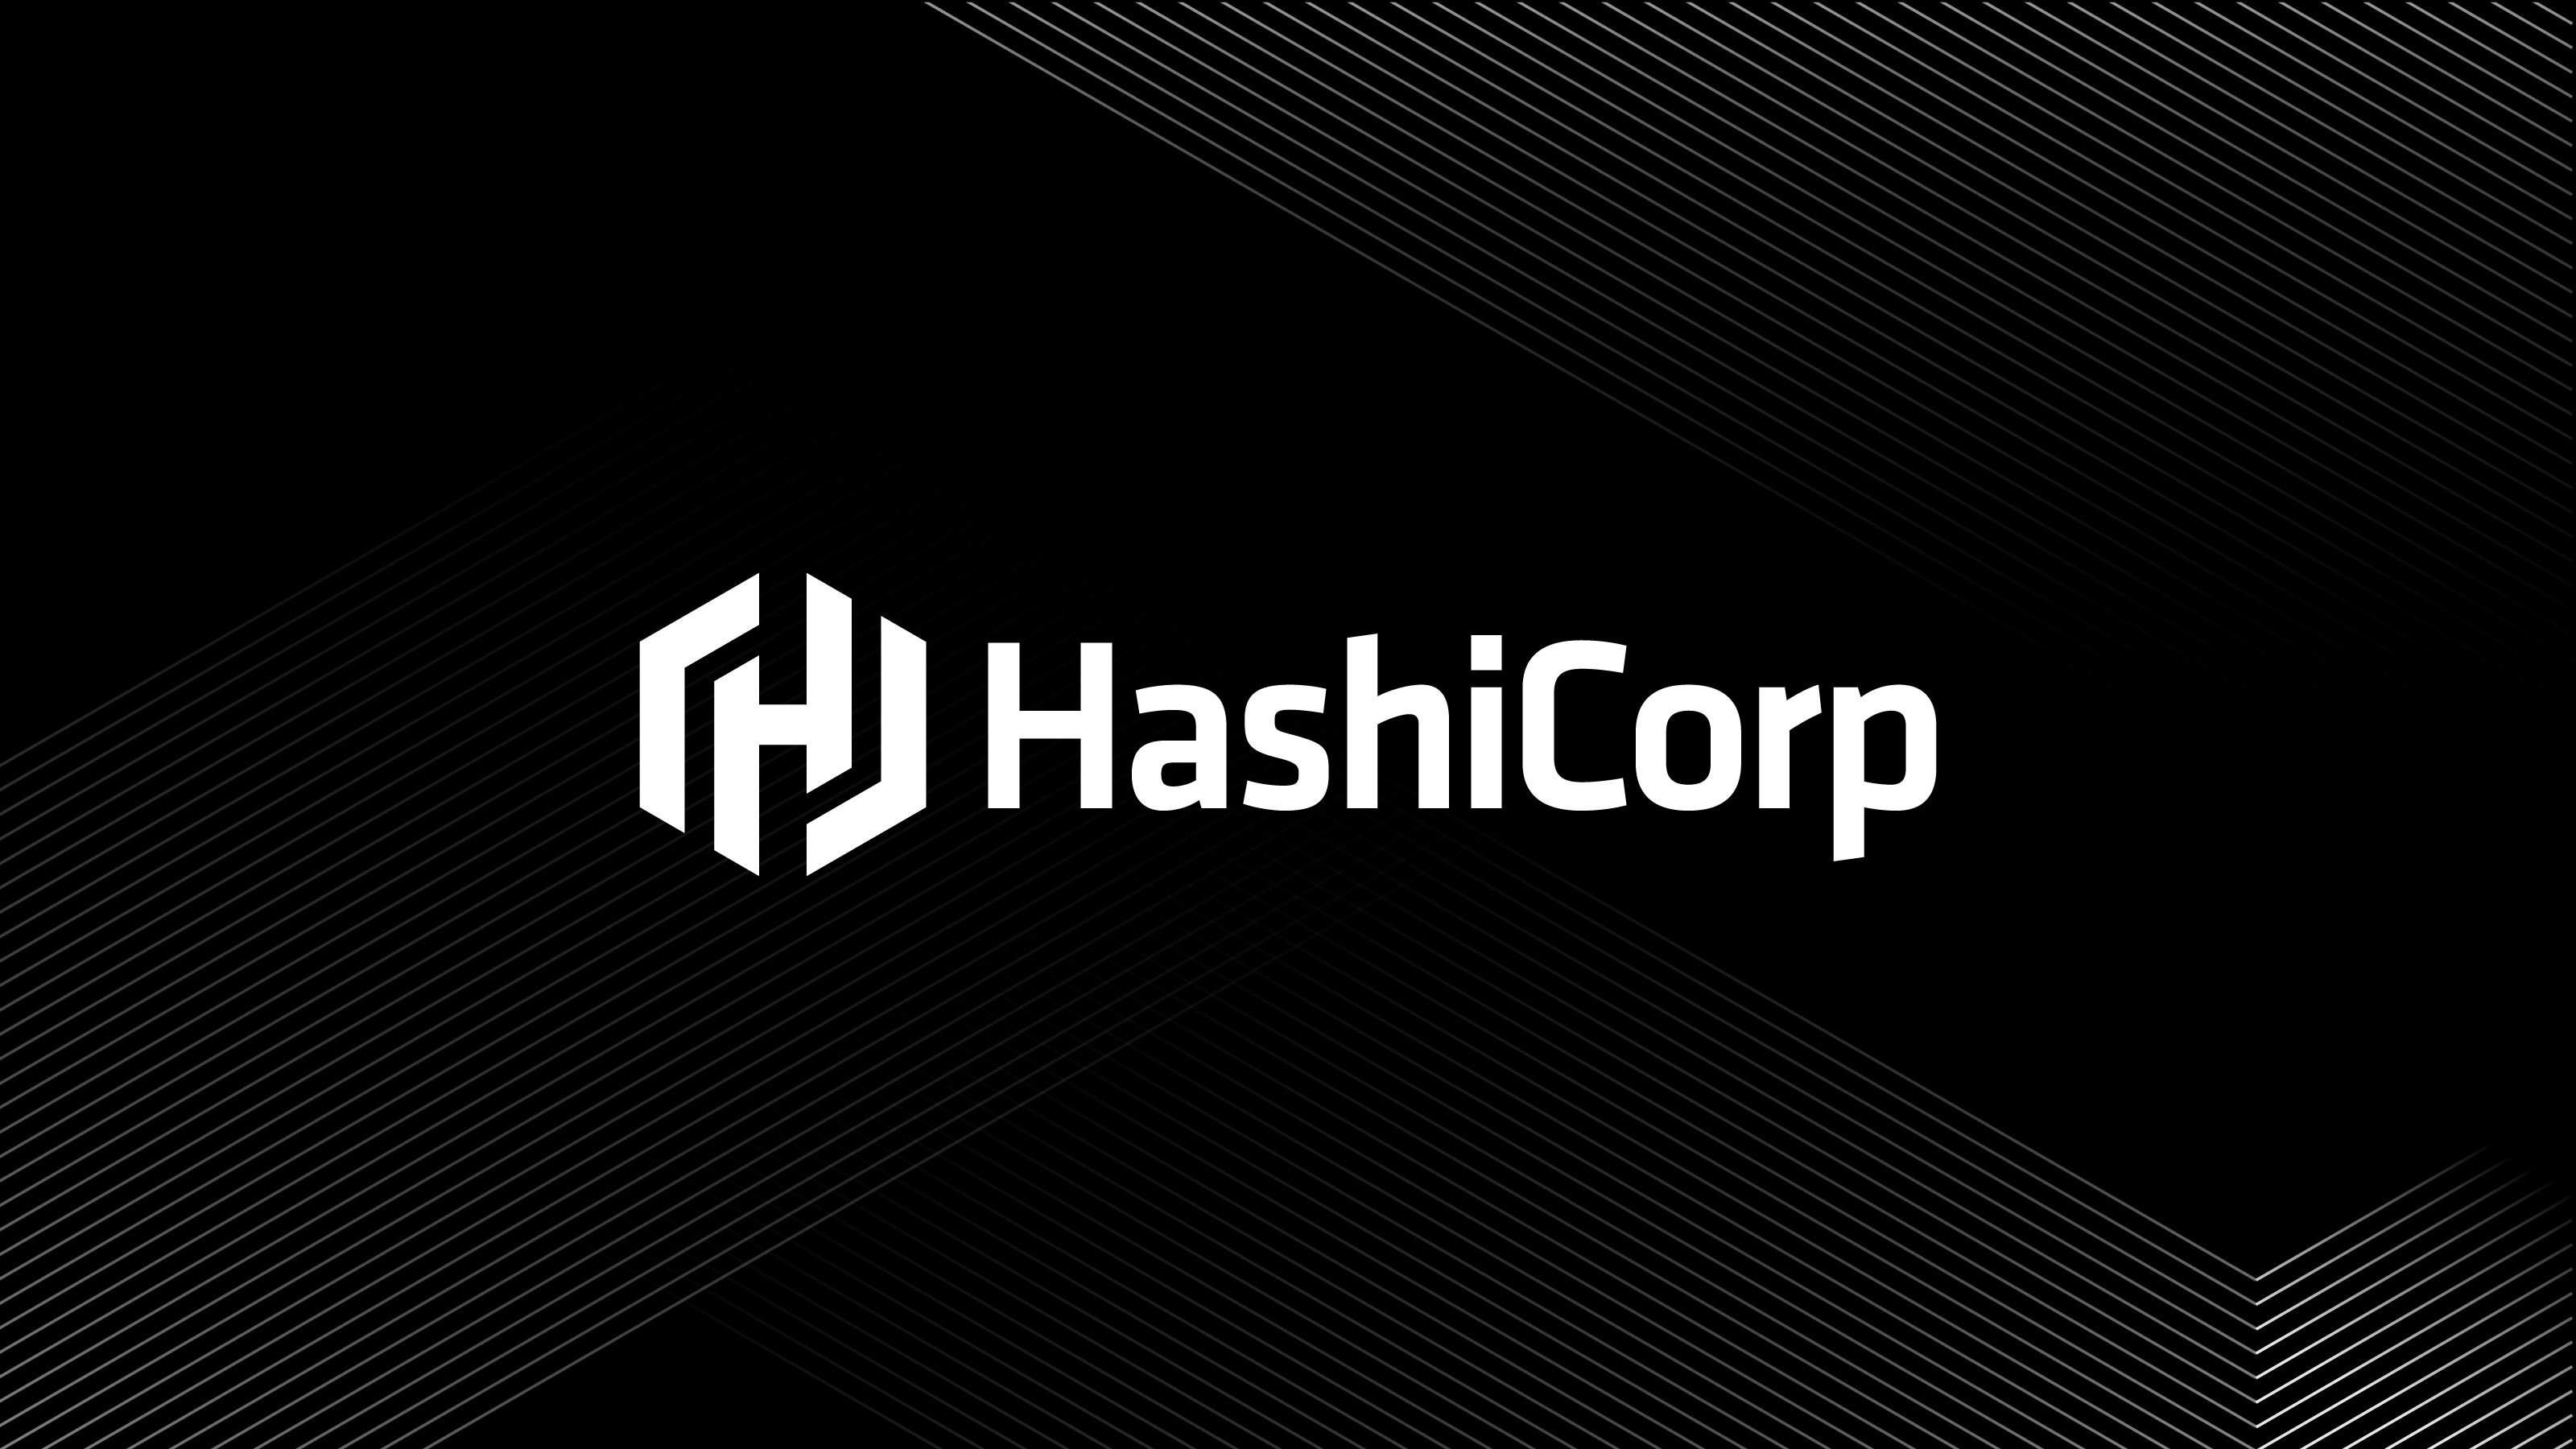 Mitchell's New Role at HashiCorp